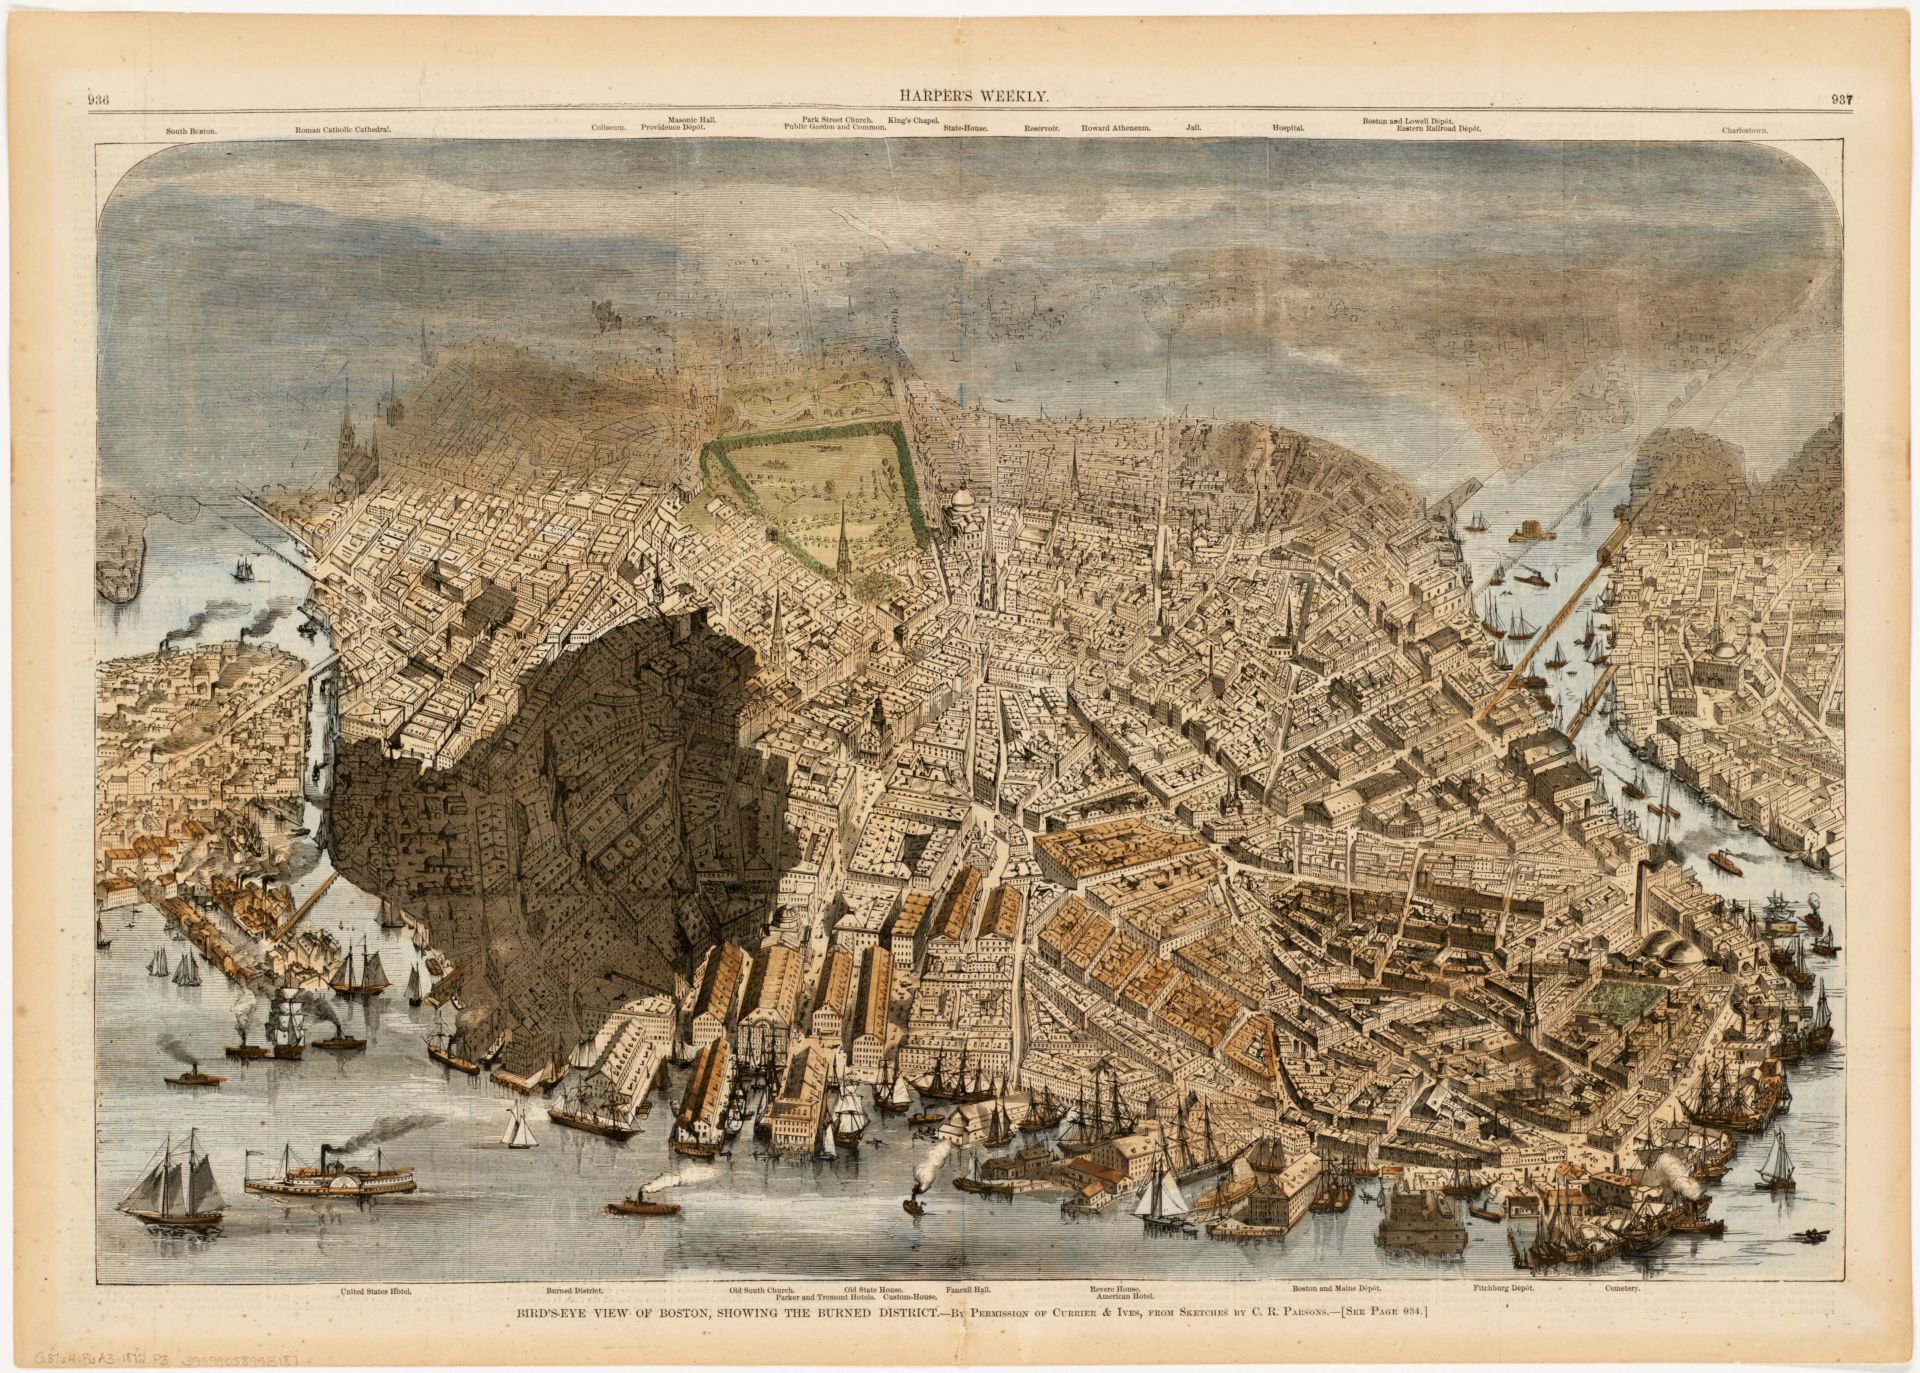 Bird's eye view of Boston with an area south of the Financial District shaded grey to represent the Great Fire's destruction.